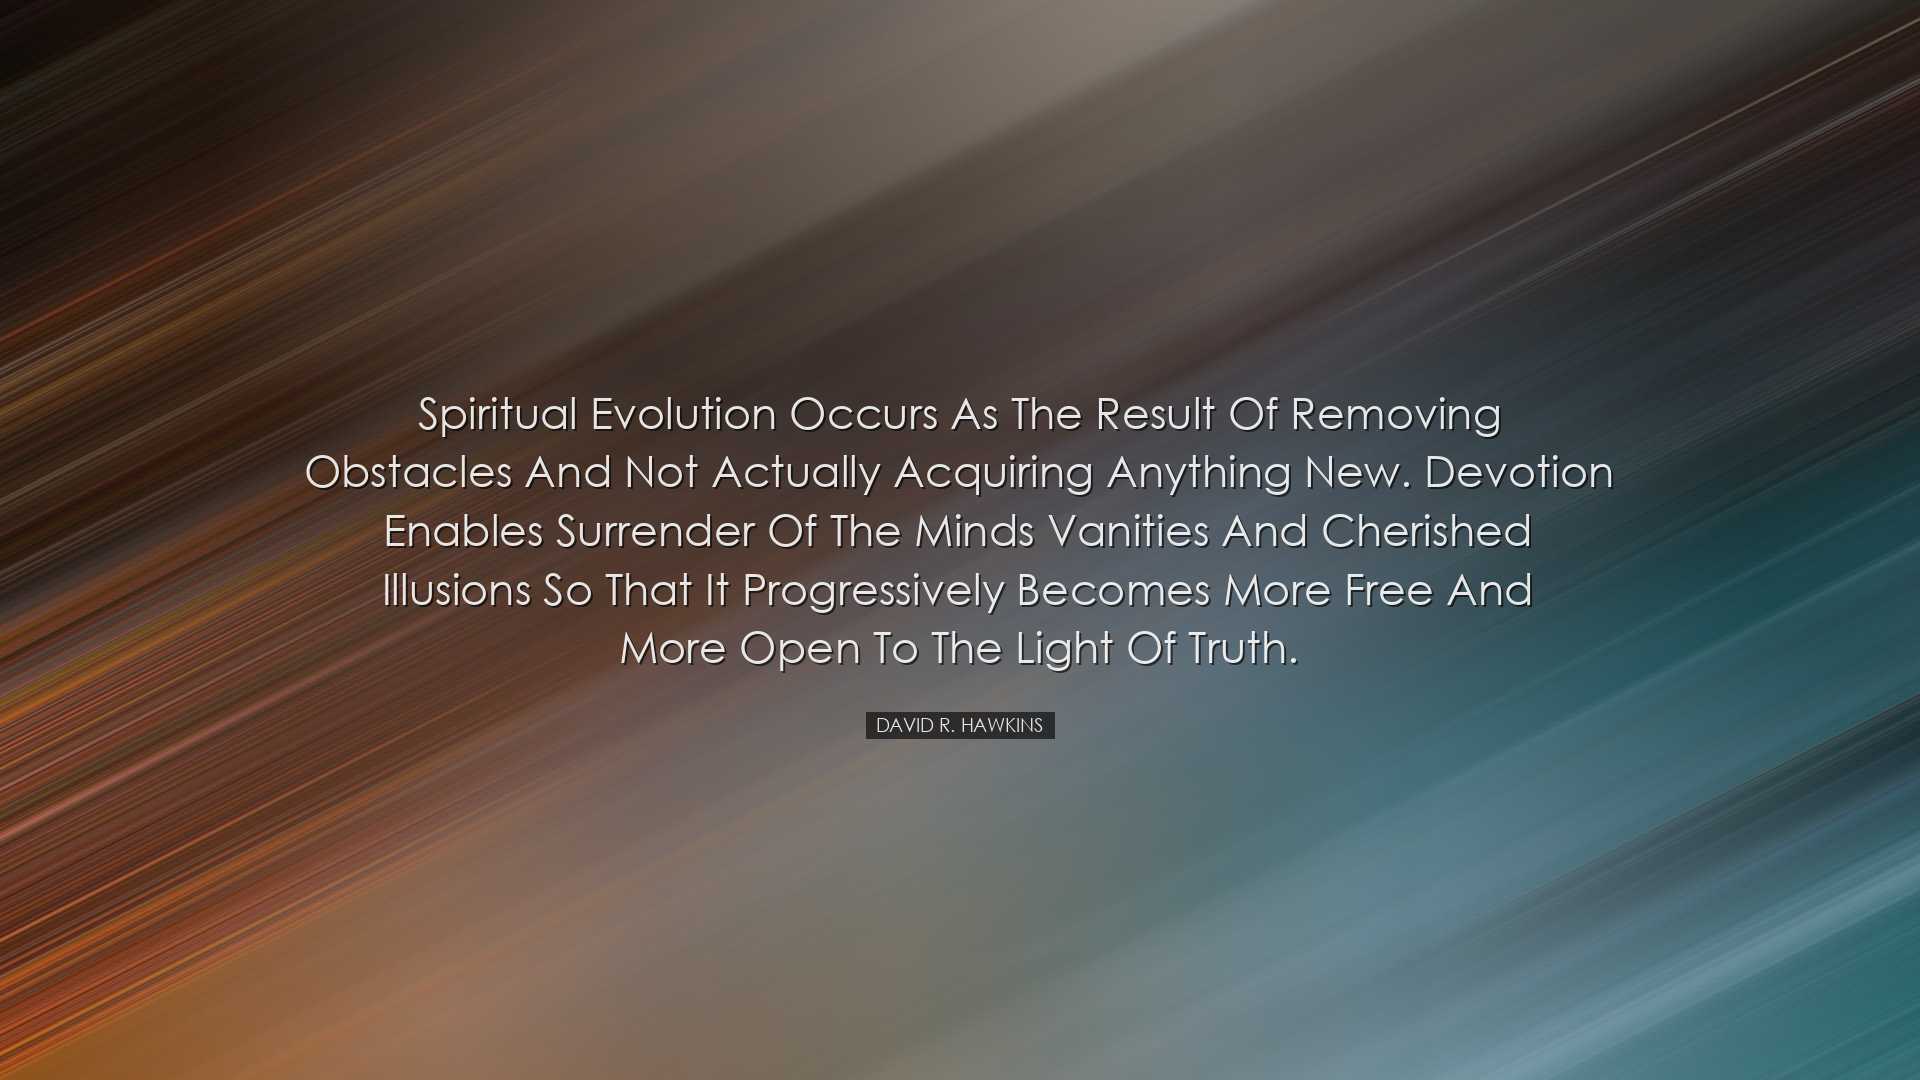 Spiritual evolution occurs as the result of removing obstacles and